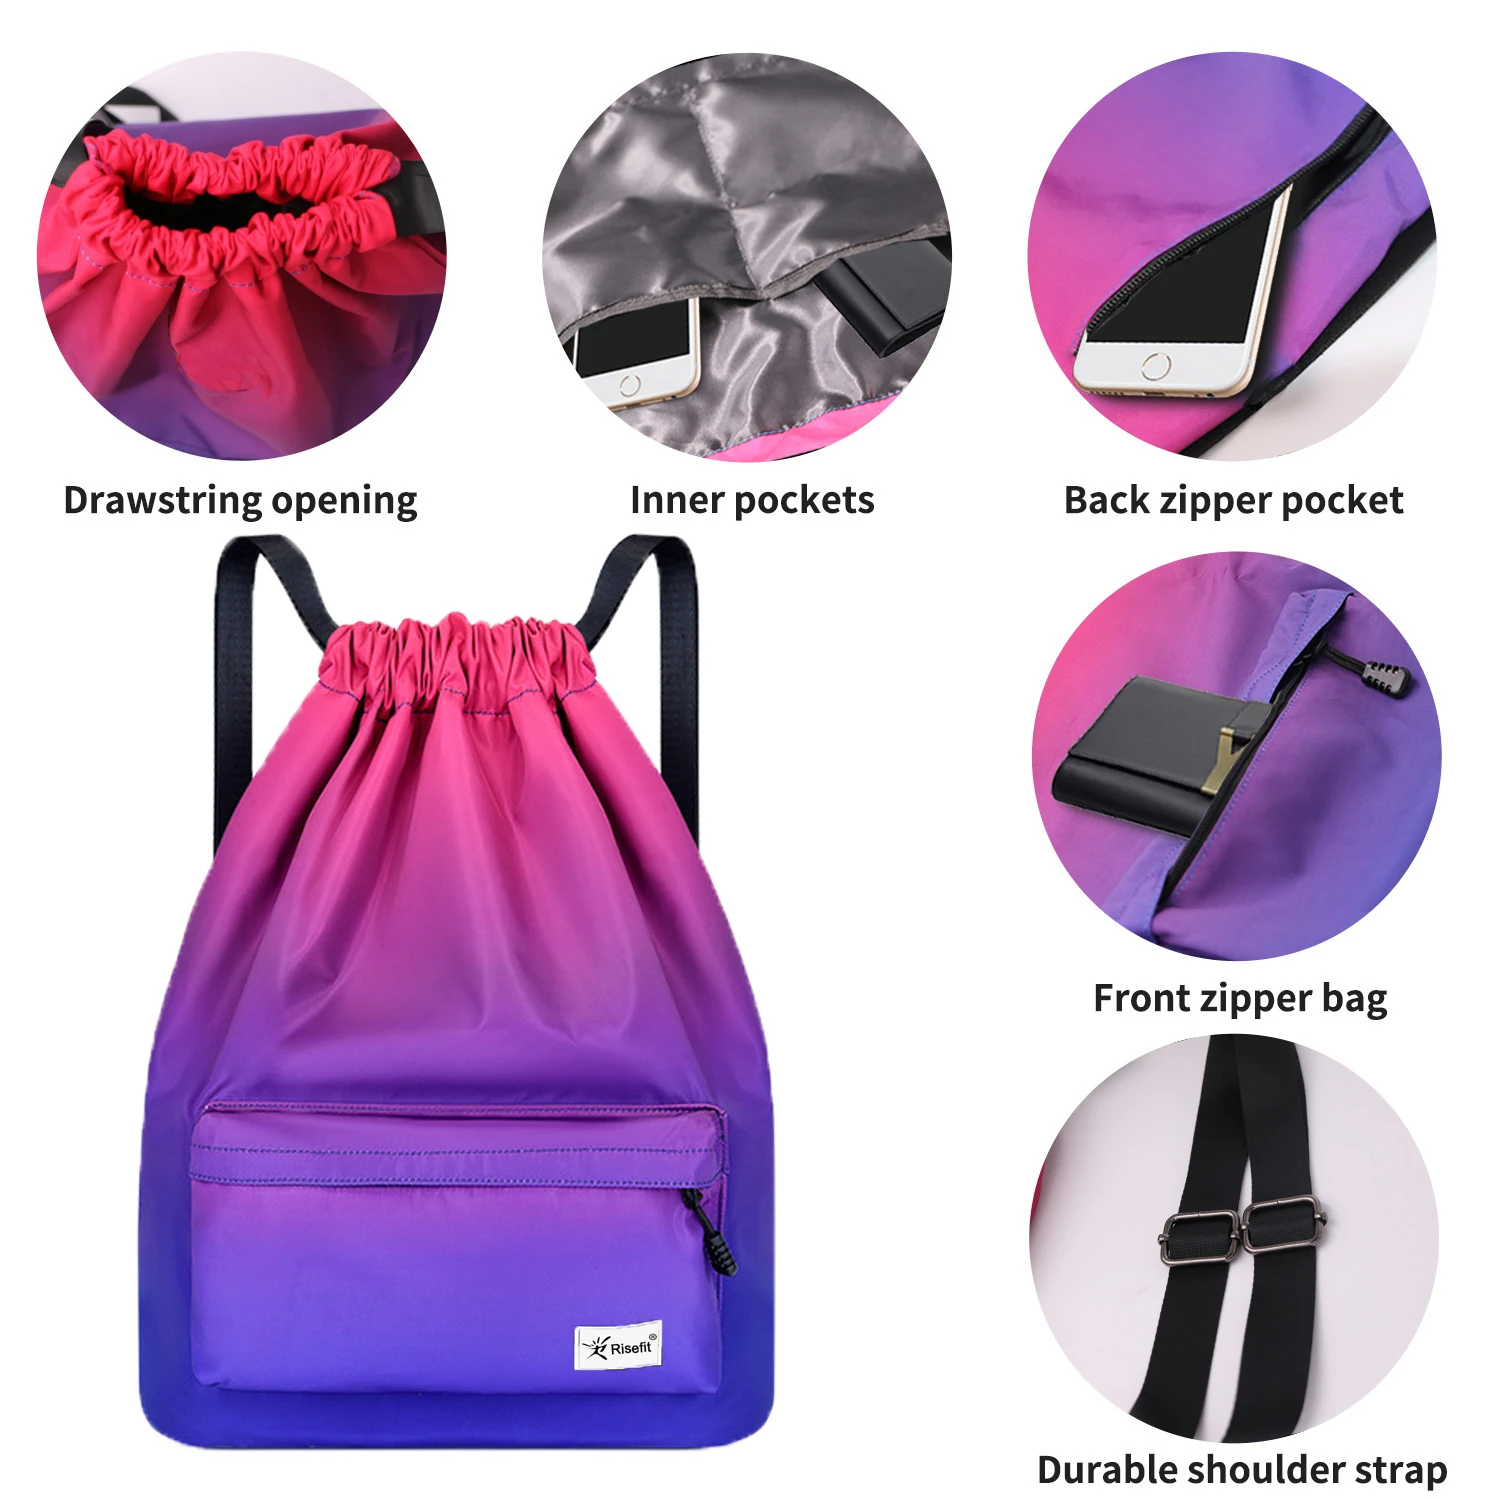 Mesh Drawstring String Backpack Bag with Inside Zipper Pocket for Toys Clothes Diving Laundry Sports Gym Gear Backpacking Travel Camping Gear Swimming Beach 